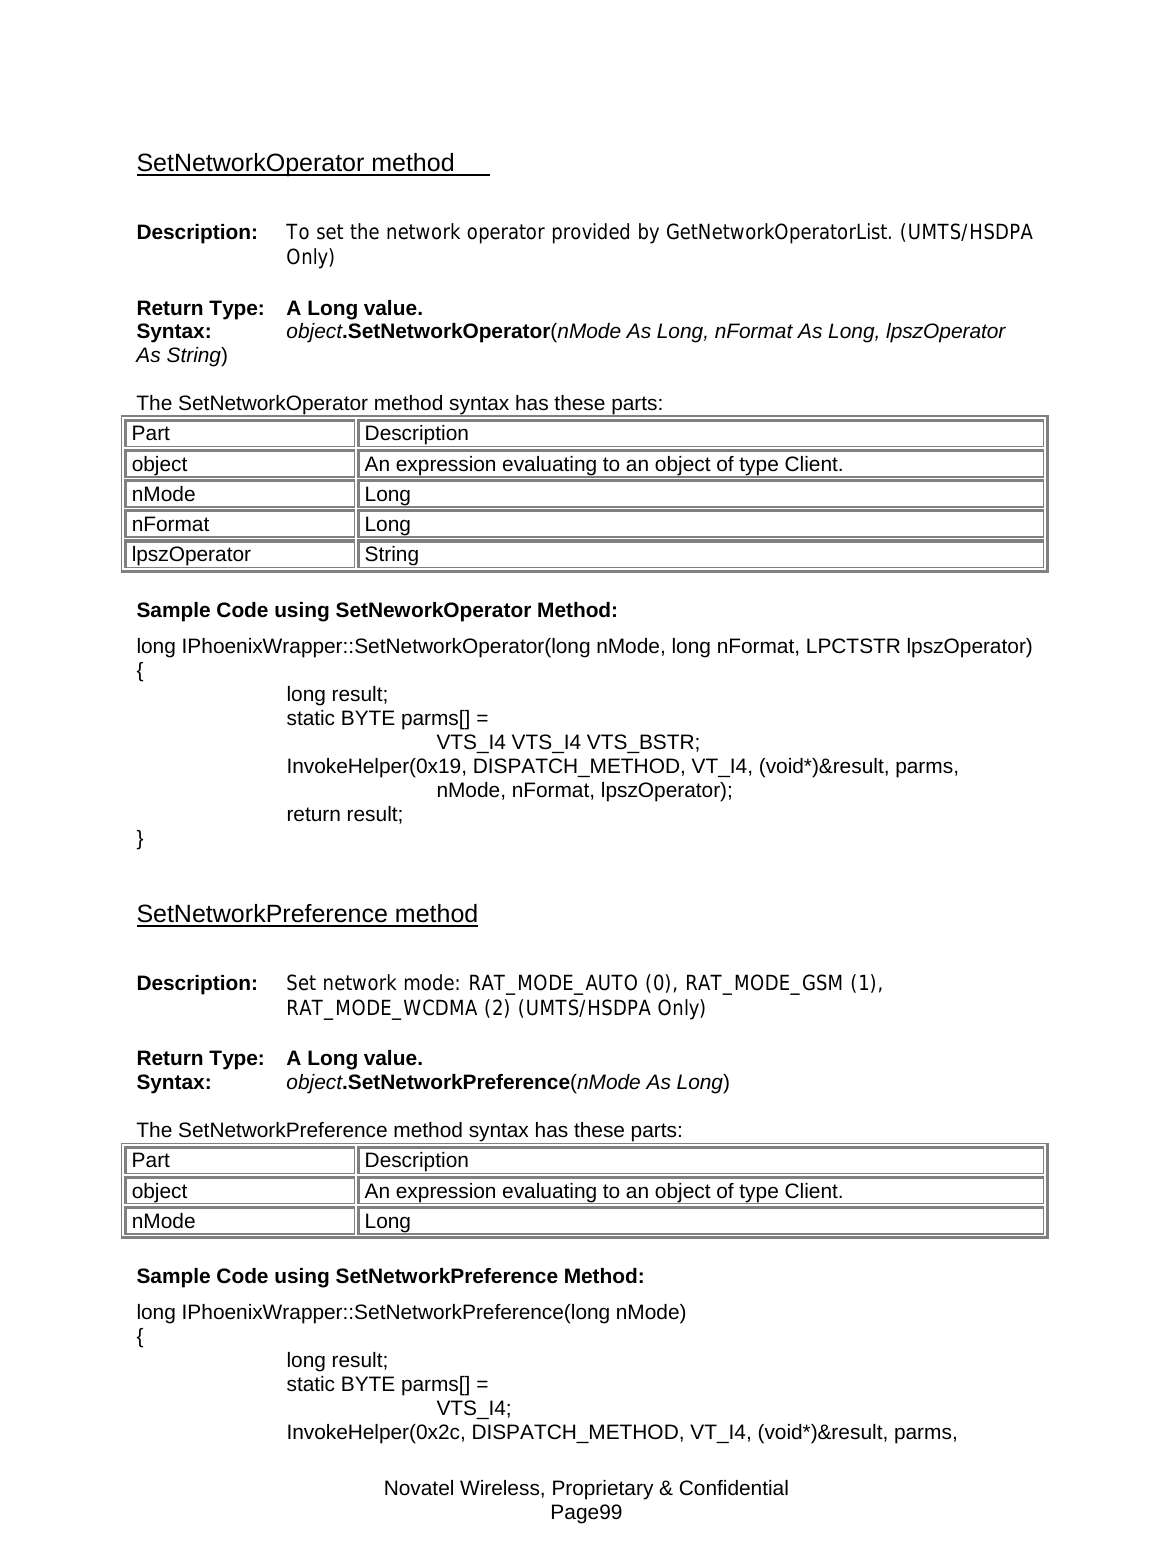 Novatel Wireless, Proprietary &amp; Confidential Page99  SetNetworkOperator method       Description:  To set the network operator provided by GetNetworkOperatorList. (UMTS/HSDPA Only) Return Type:  A Long value. Syntax:  object.SetNetworkOperator(nMode As Long, nFormat As Long, lpszOperator As String)  The SetNetworkOperator method syntax has these parts: Part Description object  An expression evaluating to an object of type Client. nMode Long nFormat Long lpszOperator String Sample Code using SetNeworkOperator Method: long IPhoenixWrapper::SetNetworkOperator(long nMode, long nFormat, LPCTSTR lpszOperator) {  long result;   static BYTE parms[] =   VTS_I4 VTS_I4 VTS_BSTR;  InvokeHelper(0x19, DISPATCH_METHOD, VT_I4, (void*)&amp;result, parms,   nMode, nFormat, lpszOperator);  return result; }  SetNetworkPreference method Description:  Set network mode: RAT_MODE_AUTO (0), RAT_MODE_GSM (1), RAT_MODE_WCDMA (2) (UMTS/HSDPA Only) Return Type:  A Long value. Syntax:  object.SetNetworkPreference(nMode As Long)  The SetNetworkPreference method syntax has these parts: Part Description object  An expression evaluating to an object of type Client. nMode Long Sample Code using SetNetworkPreference Method: long IPhoenixWrapper::SetNetworkPreference(long nMode) {  long result;   static BYTE parms[] =   VTS_I4;  InvokeHelper(0x2c, DISPATCH_METHOD, VT_I4, (void*)&amp;result, parms, 